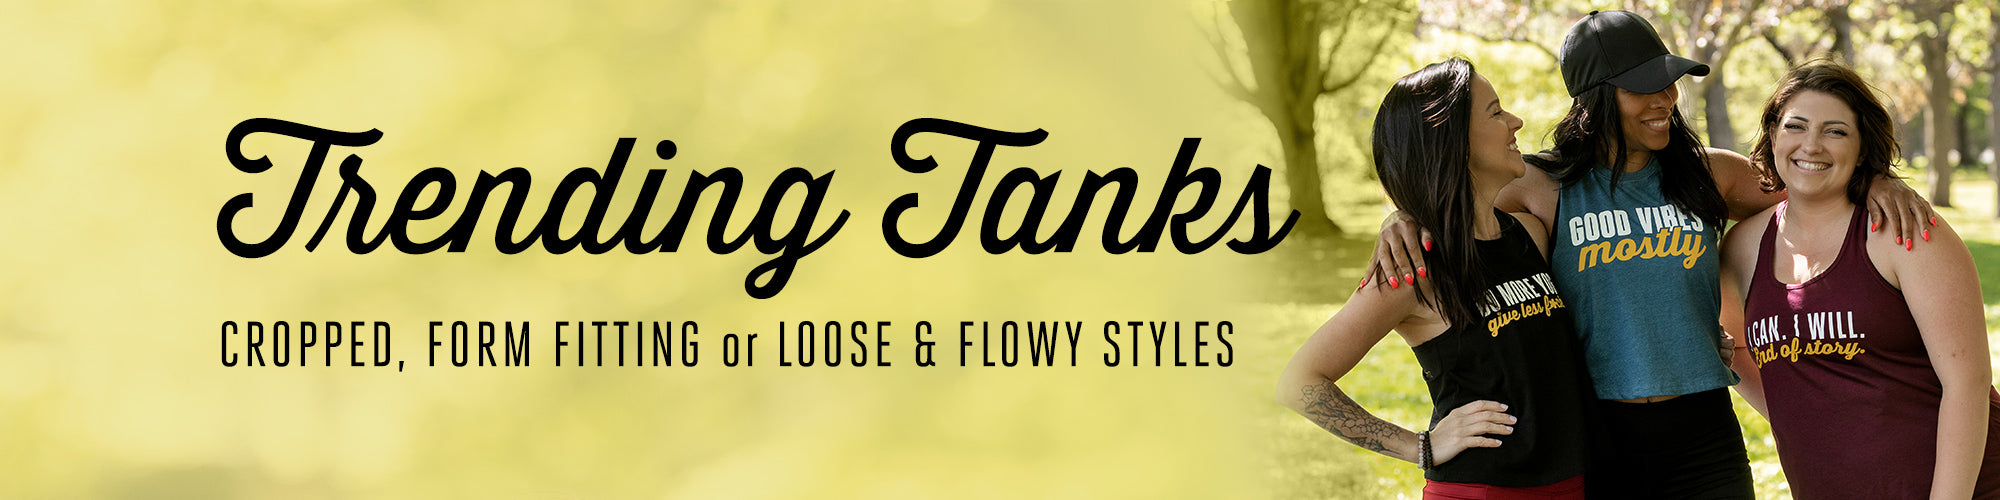 We have high quality cropped, form fitting or loose and flow styles of tank tops for women, that feature empowering sayings for women. Asskicker Activewear is a Canadian, woman-owned small business in Barrie, Ontario.